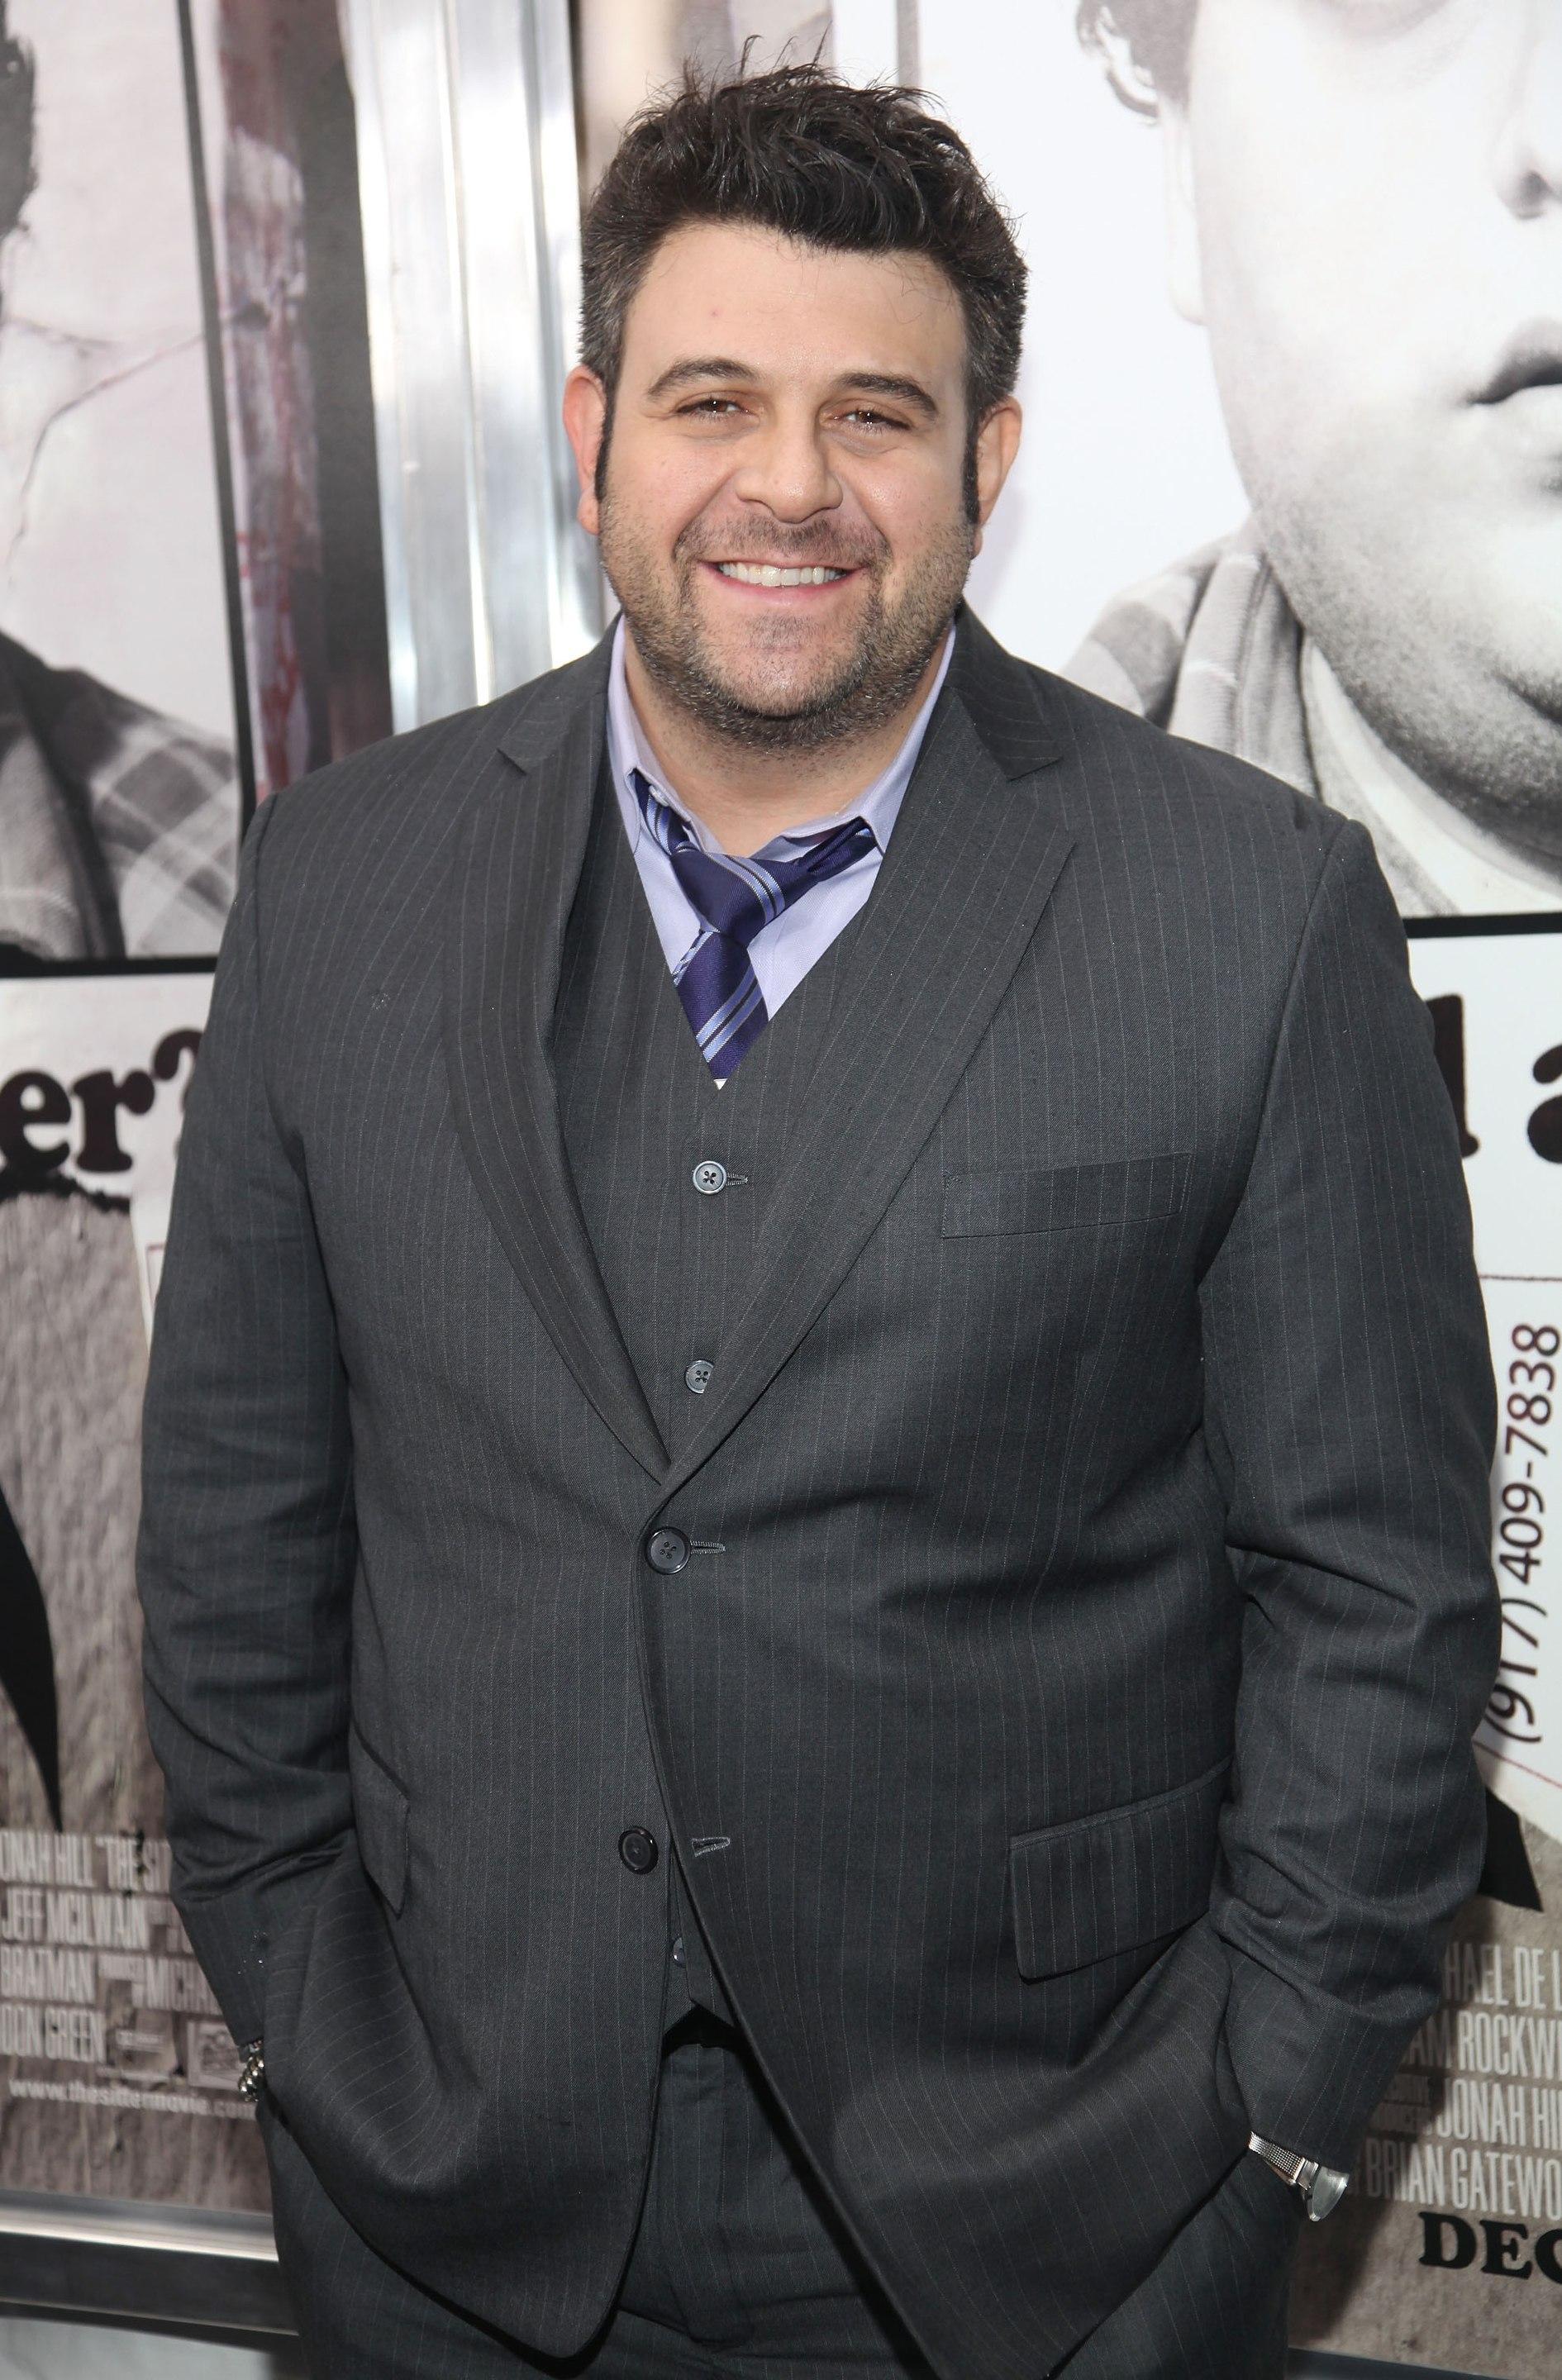 Food Fighters: Get to Know Food Fighters Host Adam Richman Photo